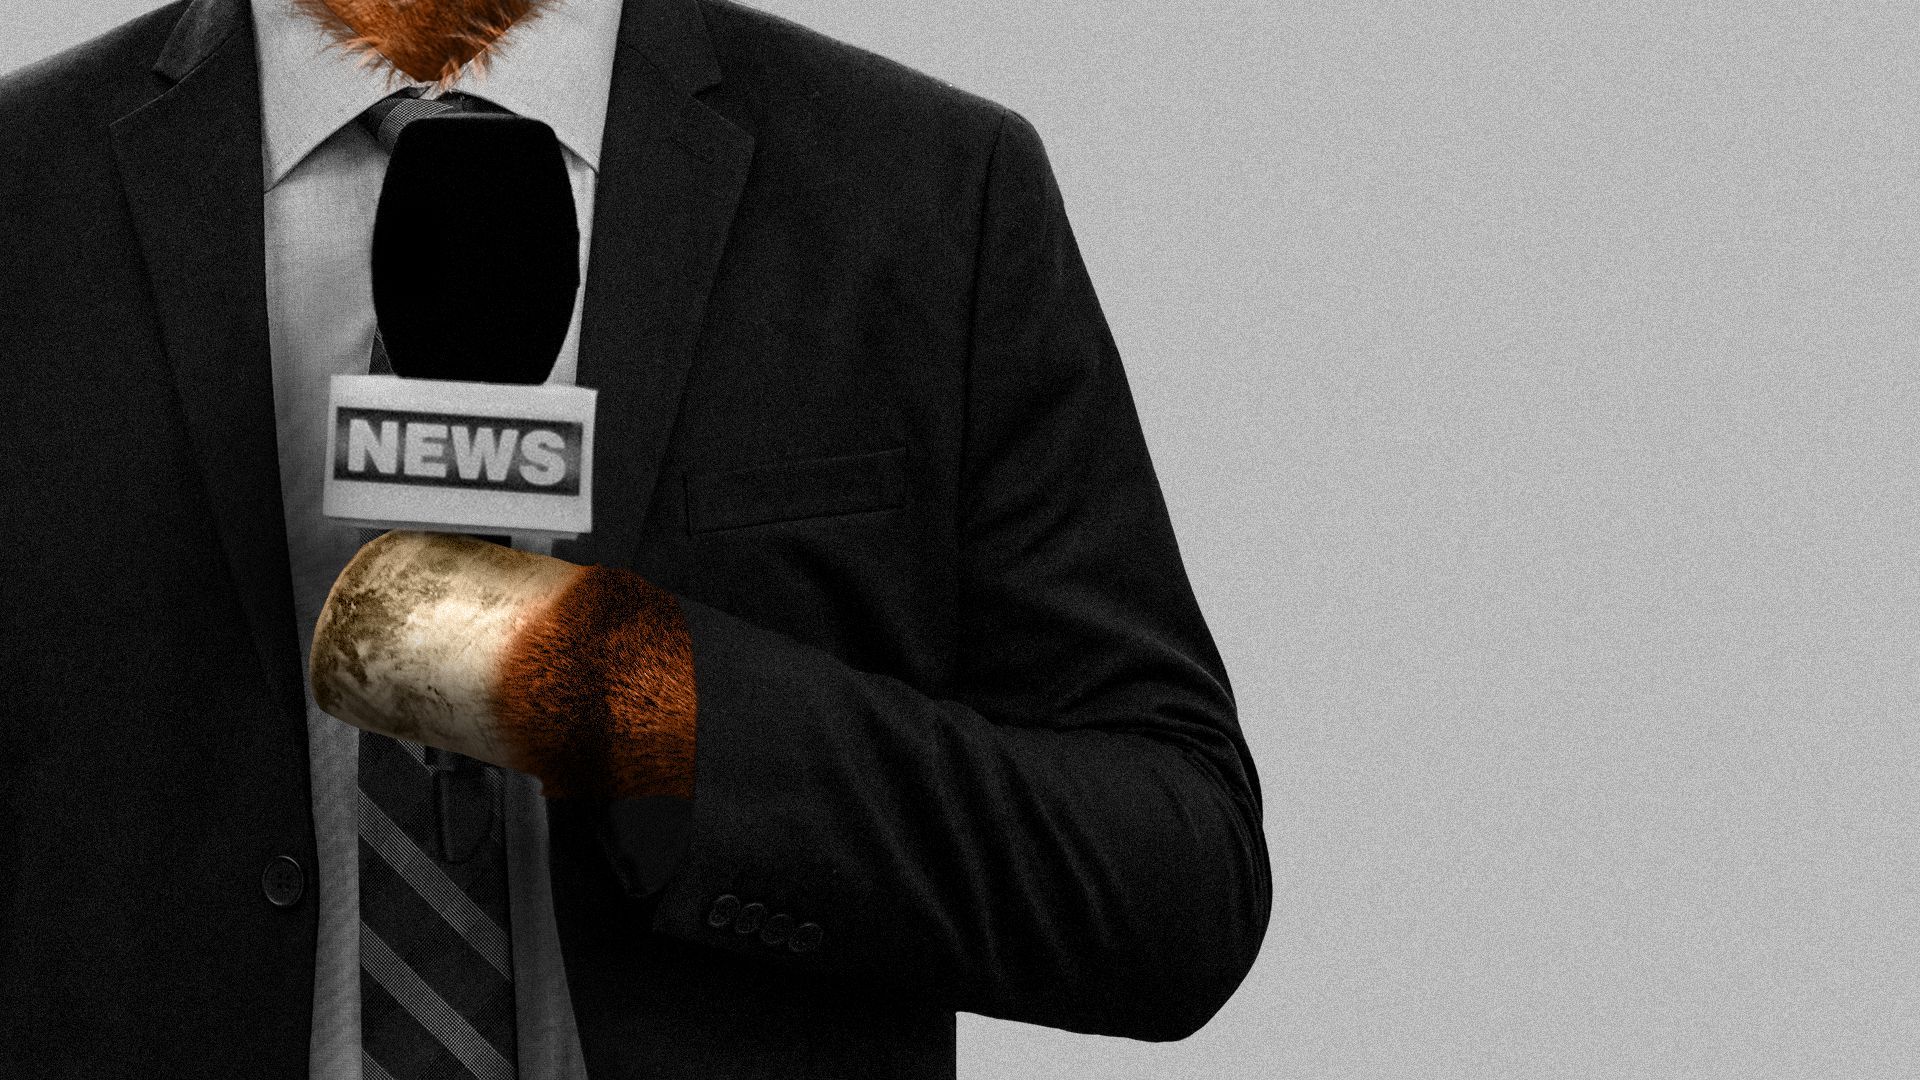 Illustration of a donkey dressed as a news anchor holding a news microphone.